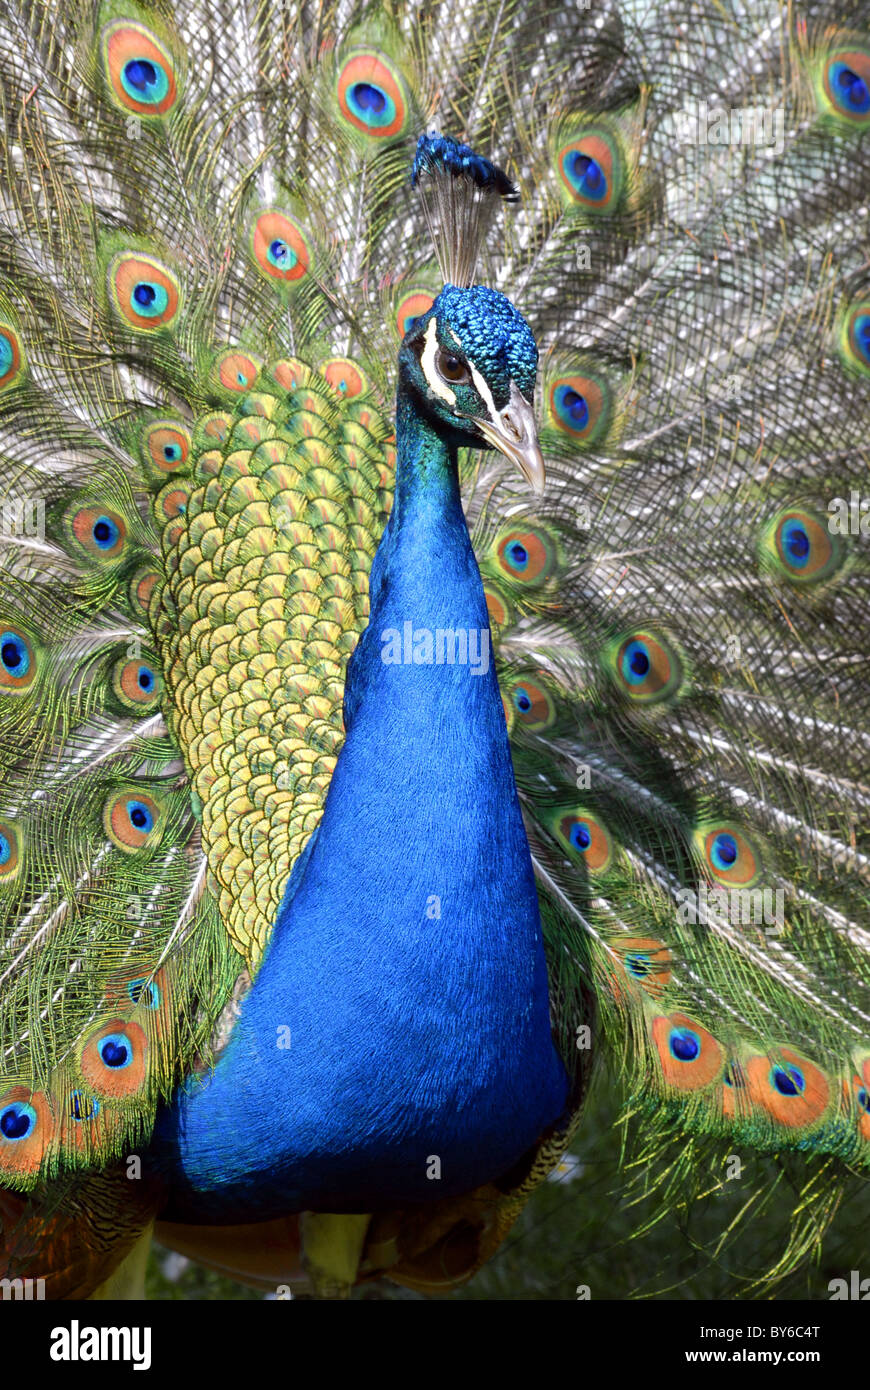 Closeup peacock (Pavo cristatus) view of front with feathers on display Stock Photo